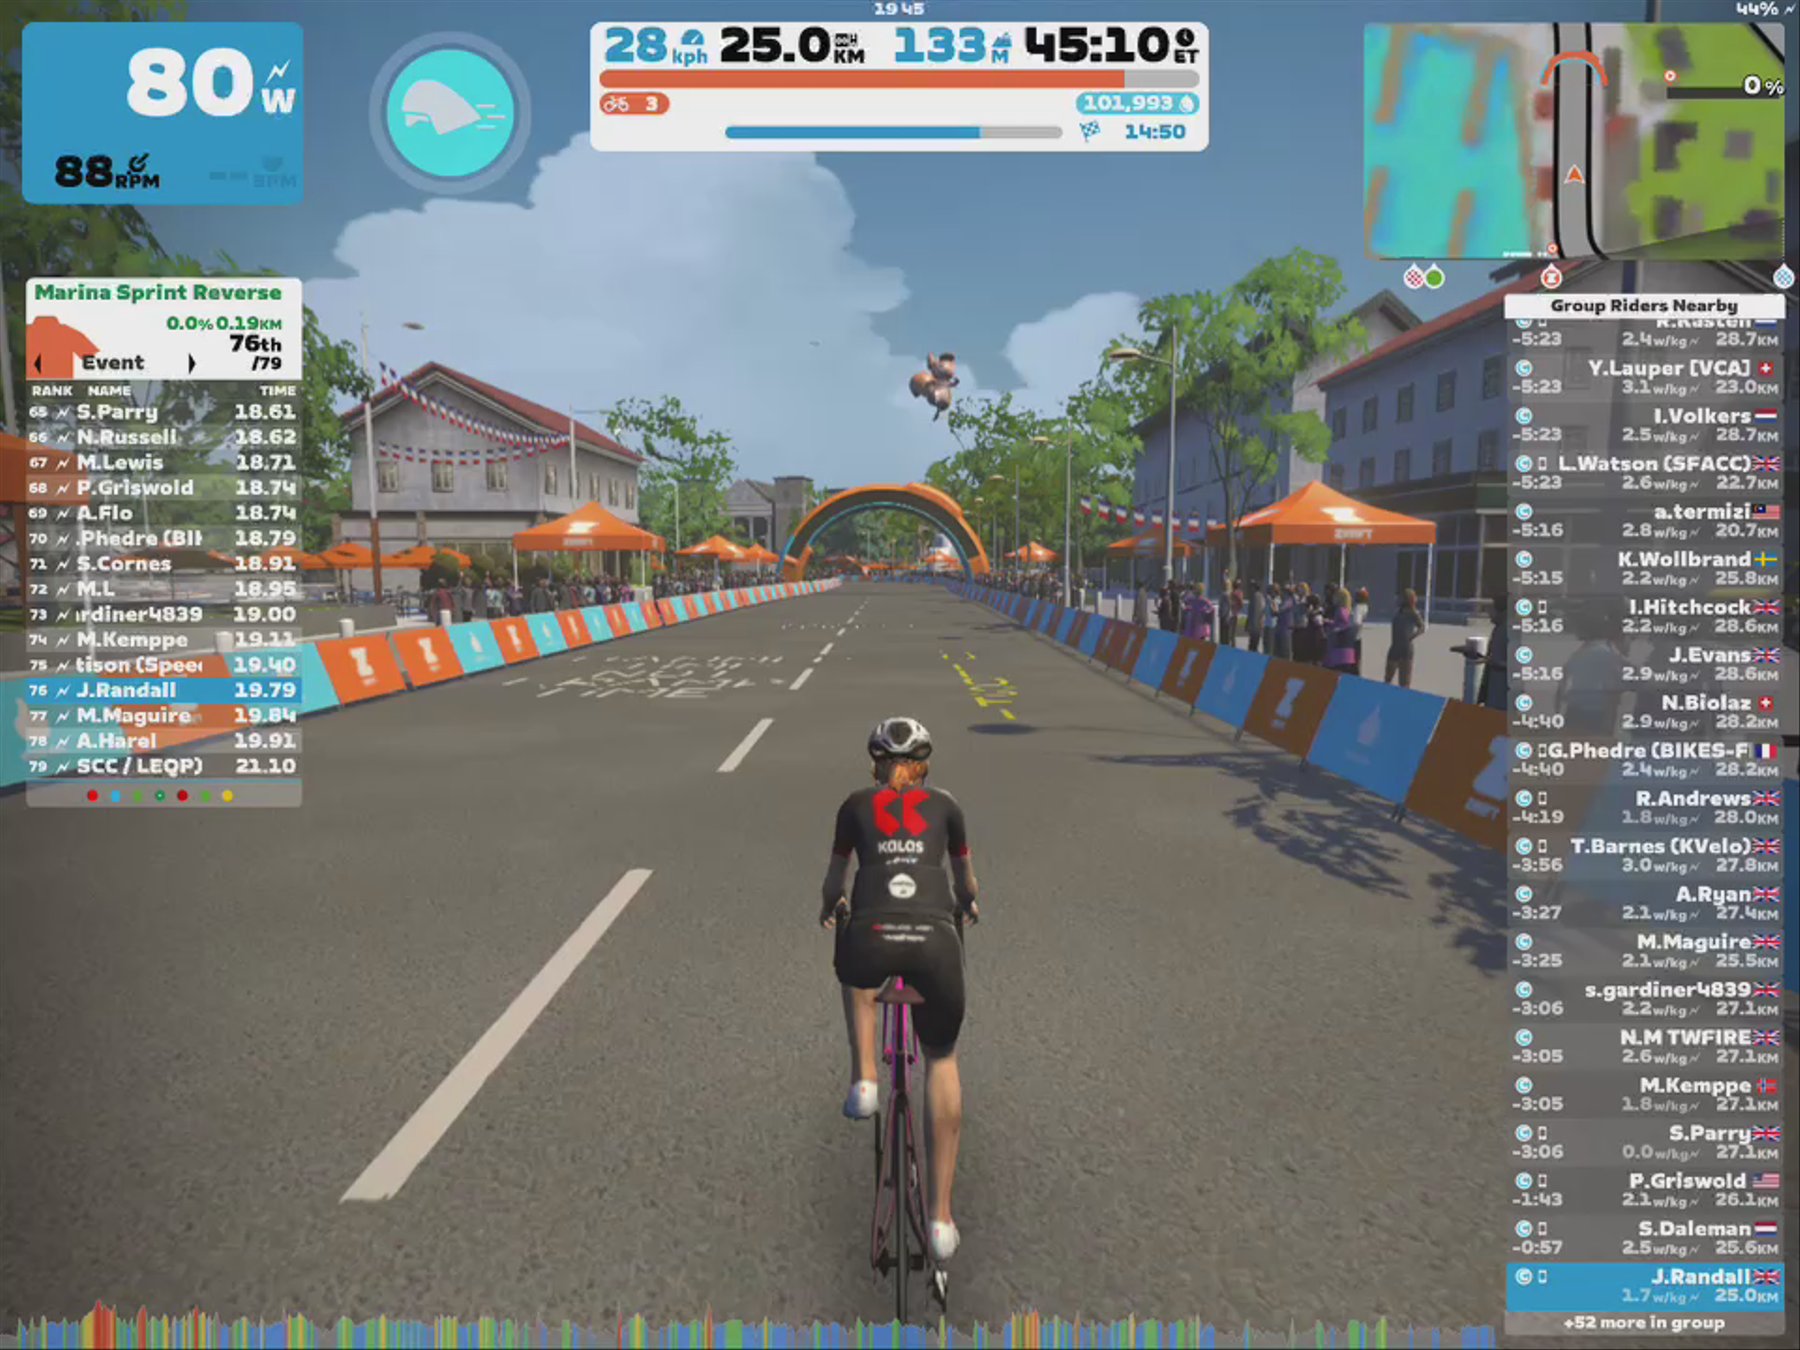 Zwift - Group Ride: The Tour 21 Tuesday Social (C) on R.G.V. in France